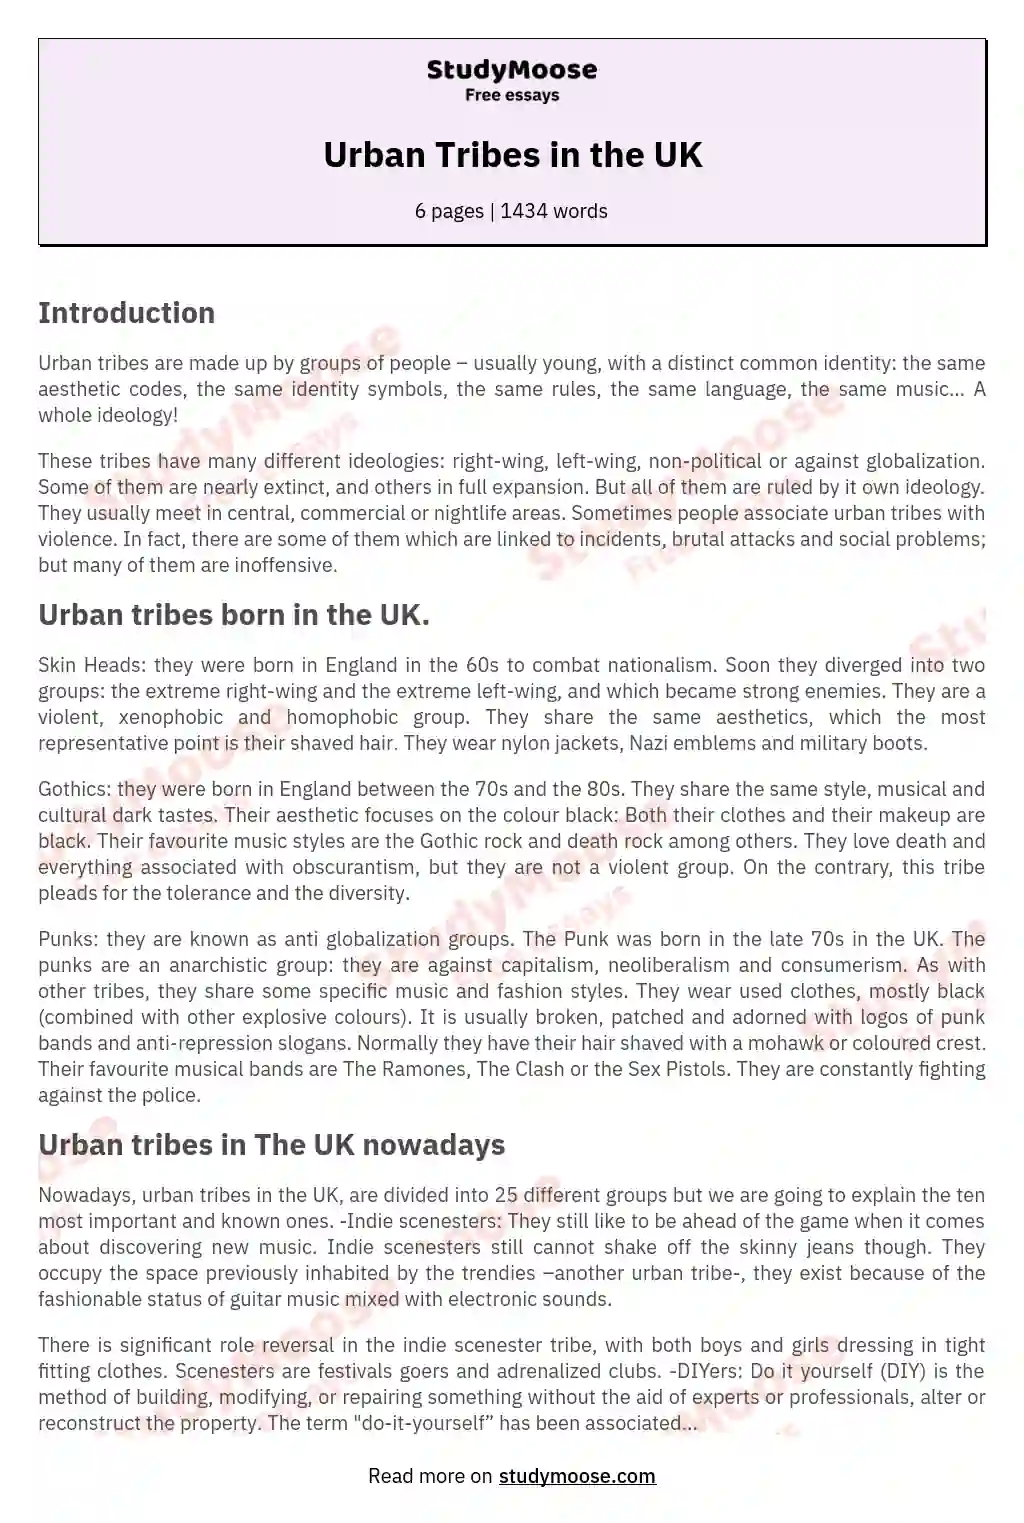 Urban Tribes in the UK essay